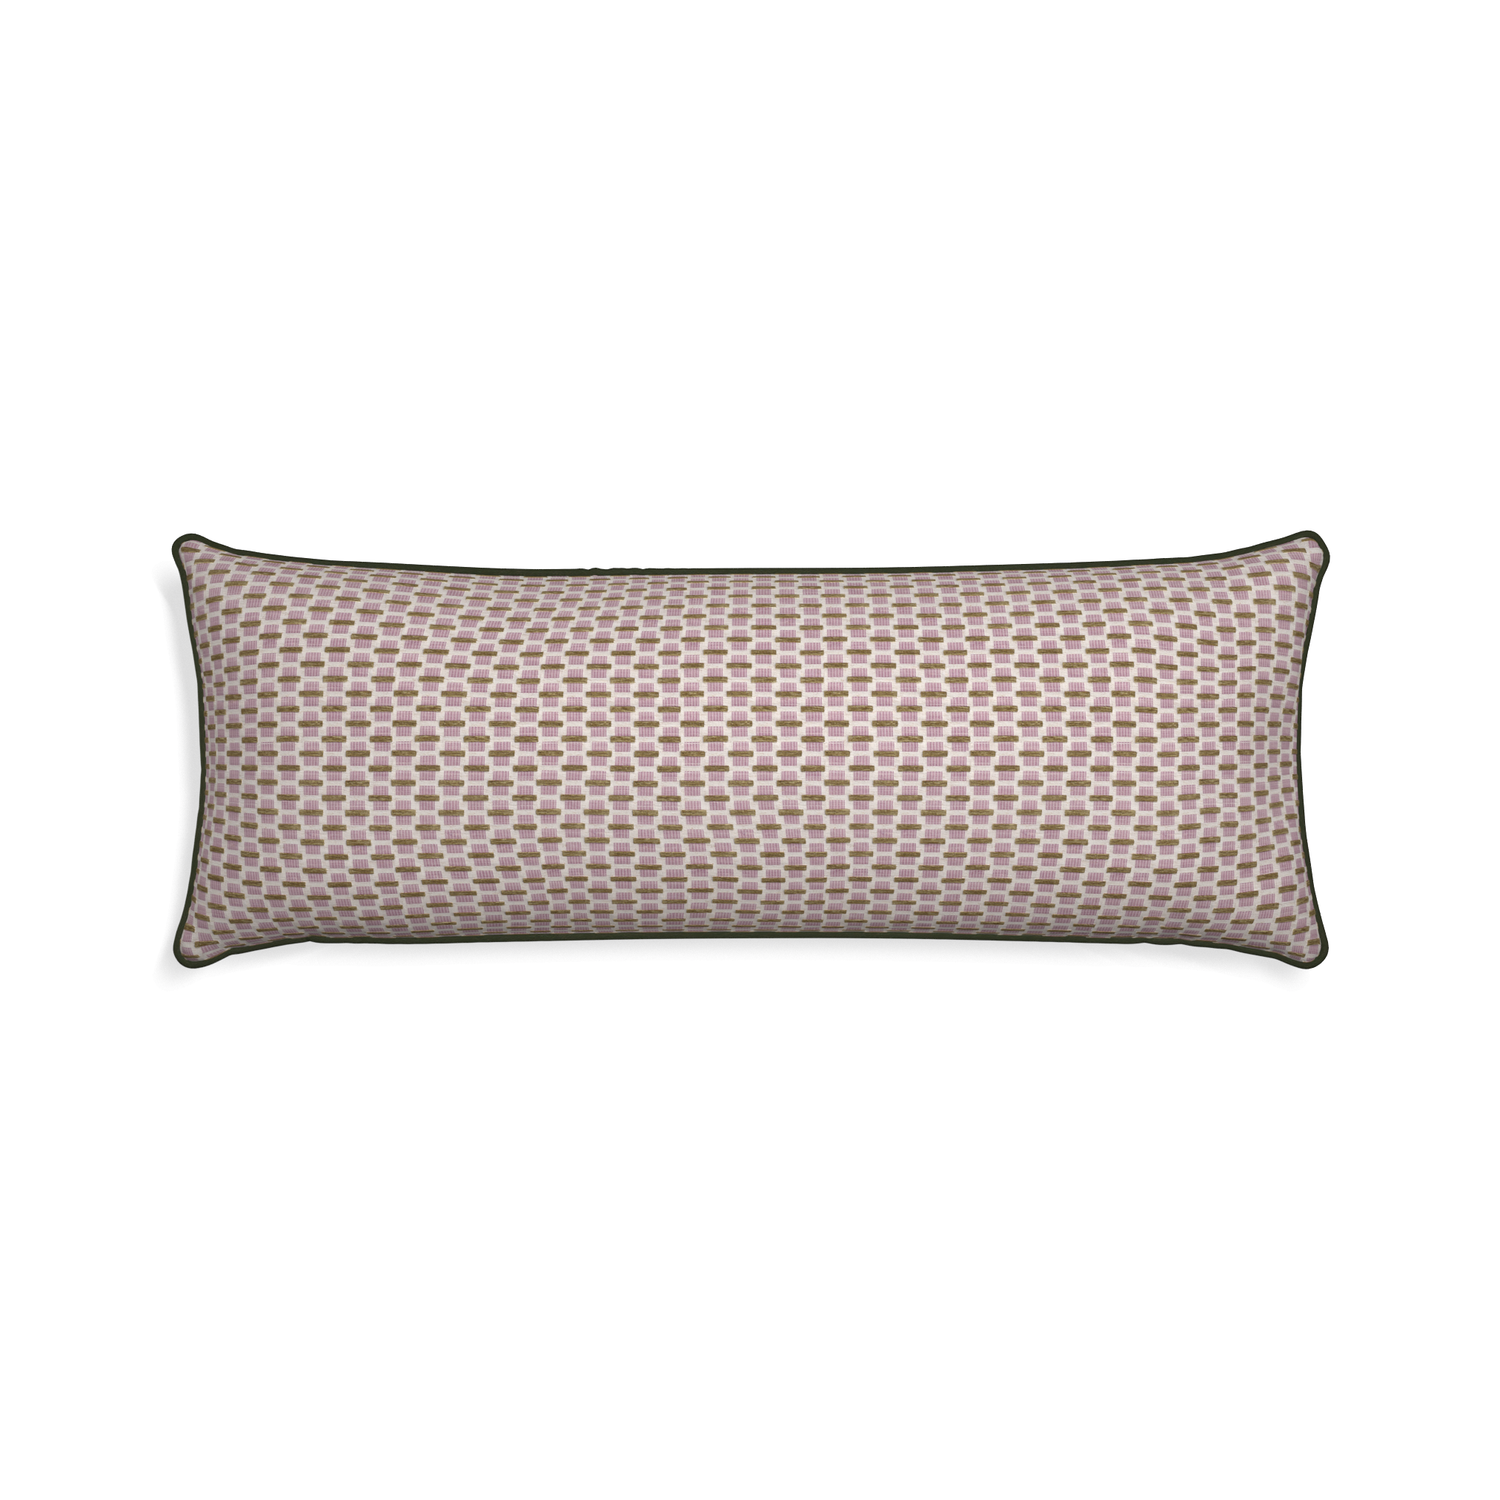 Xl-lumbar willow orchid custom pink geometric chenillepillow with f piping on white background